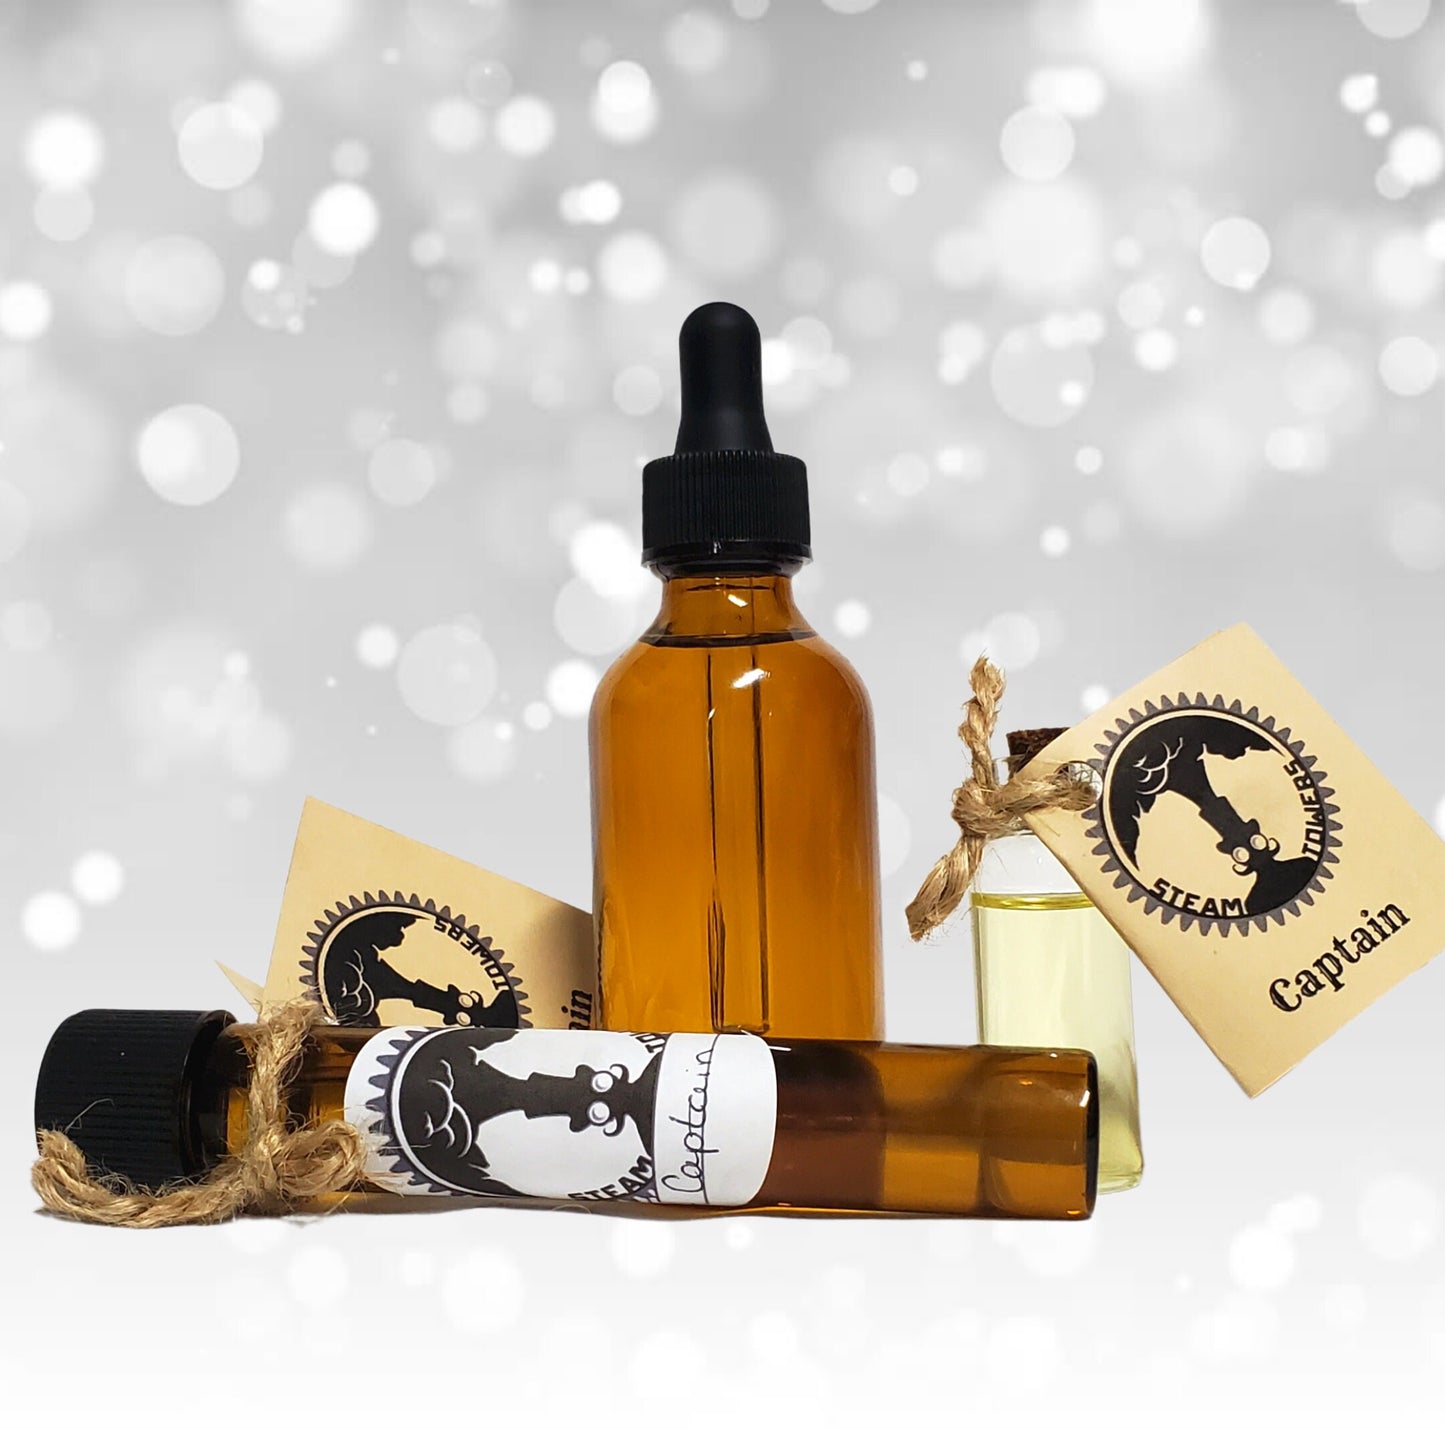 SALE! Bigfoot Scented Beard oil for your Cryptid Needs! Lord and Lady Towers